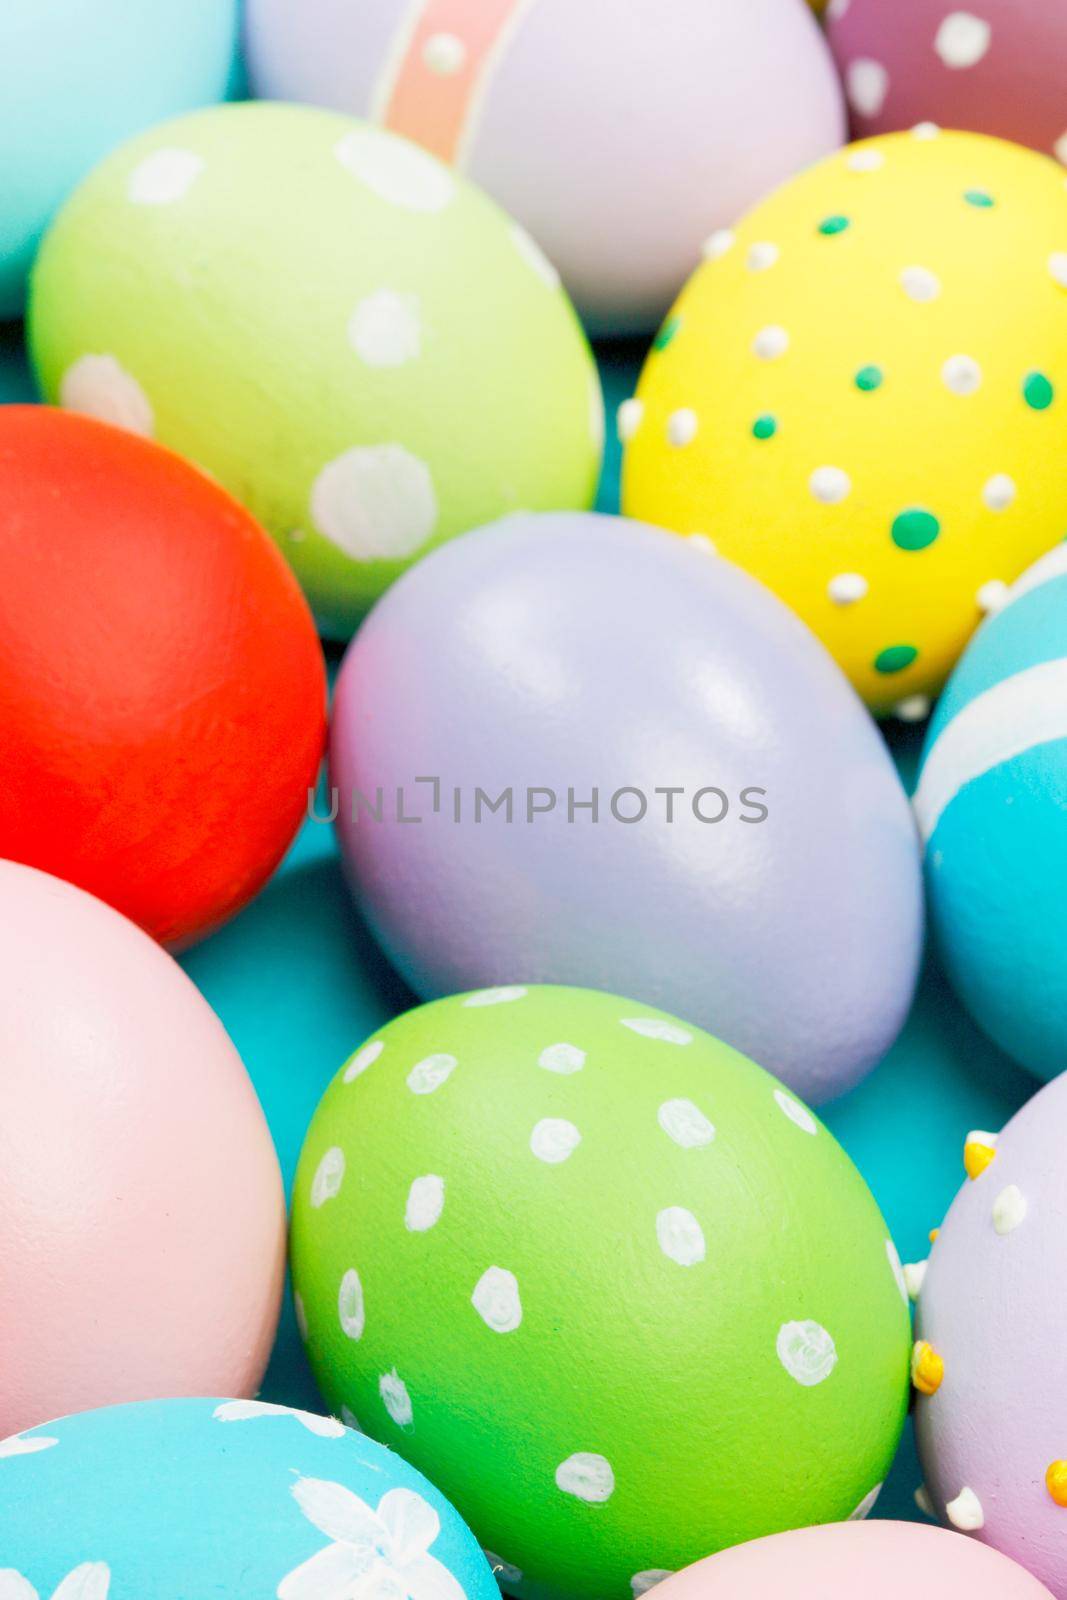 Beautiful background of many colorful easter eggs top view